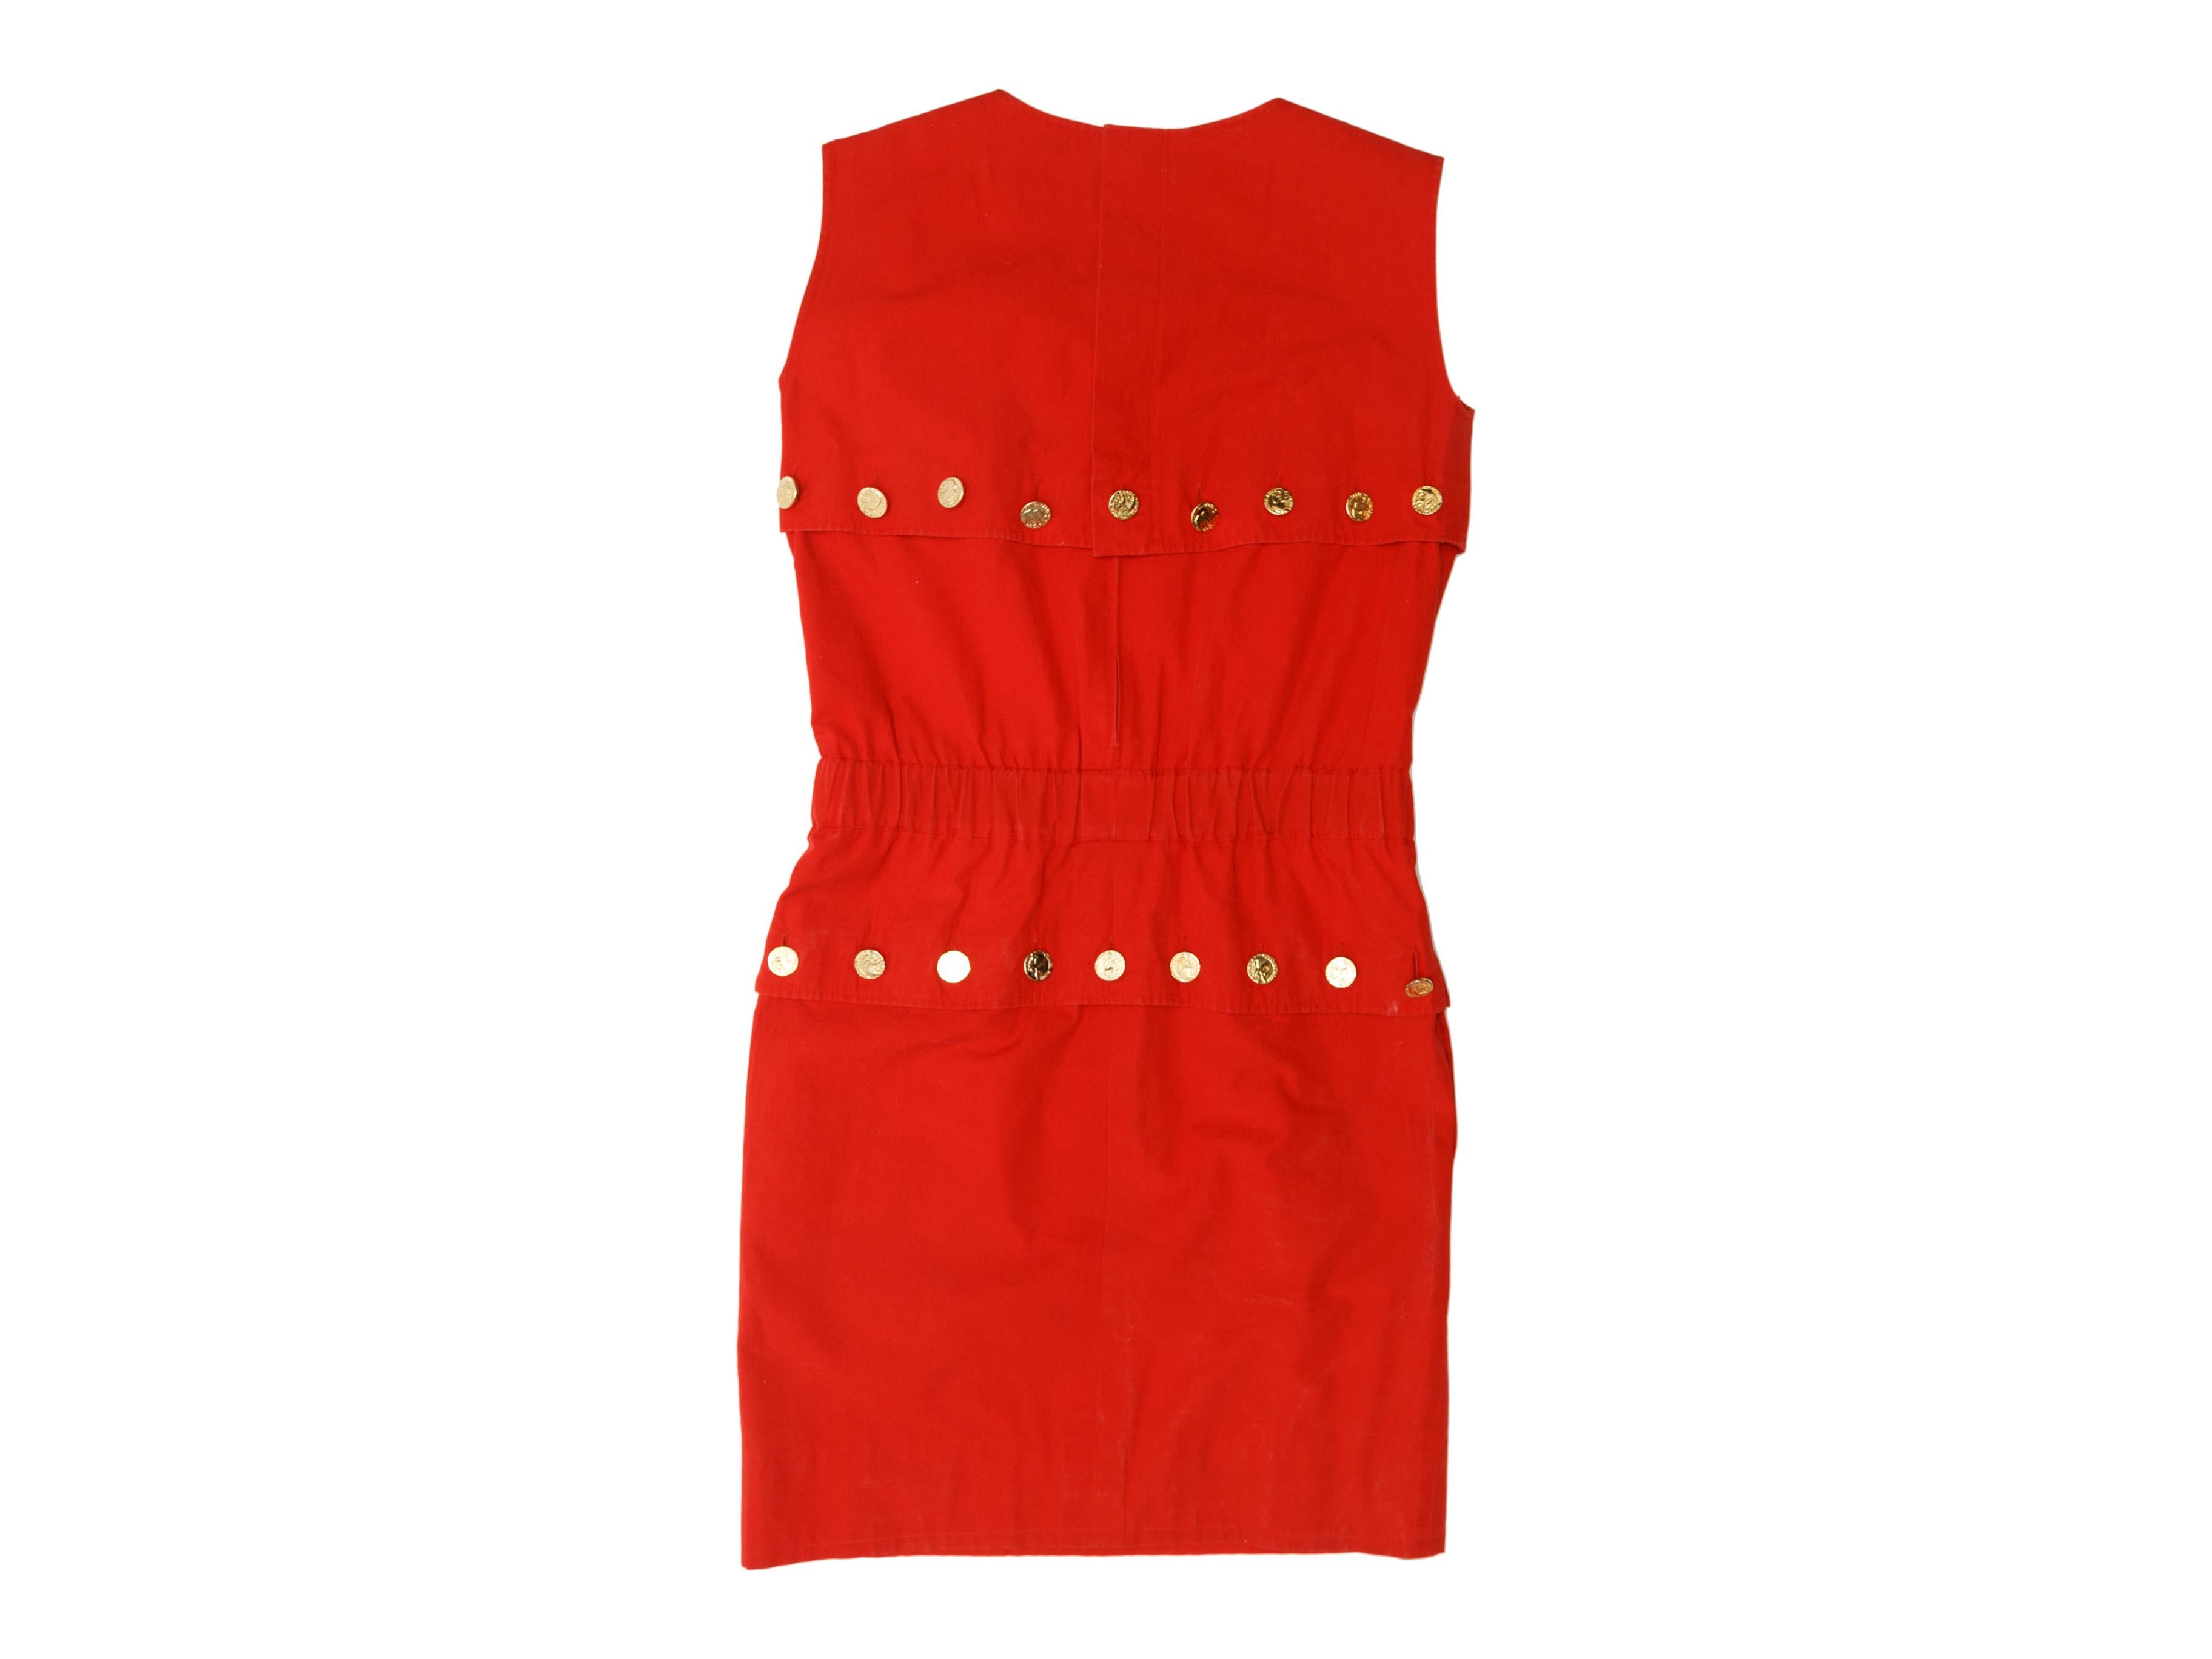 Product details: Vintage red sleeveless dress by Chanel Boutique. Crew neck. Gold-tone button accents throughout. Zip closure at back. 34